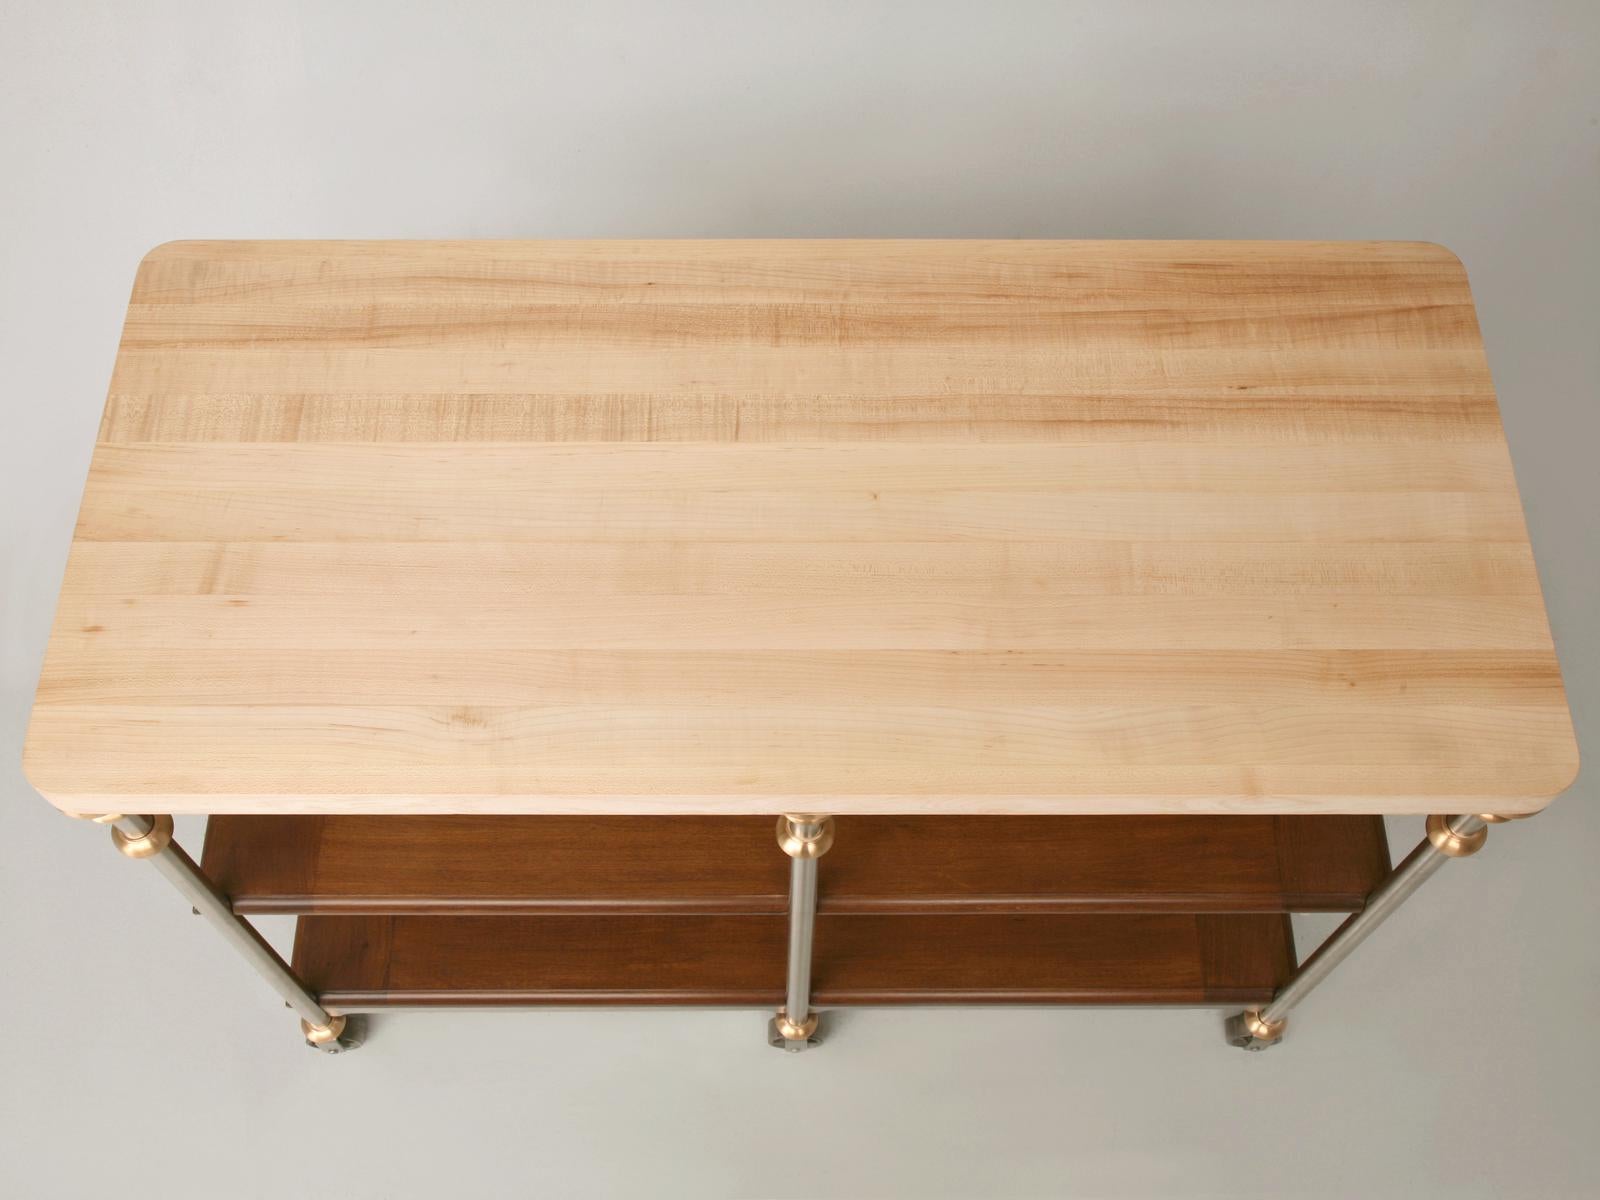 Custom made in any dimension, stainless steel and bronze kitchen island or work table, with rift-cut white oak shelves (walnut optional), breadboard ends and a butcher block top made in our on-site Old Plank workshop. This island can be reproduced